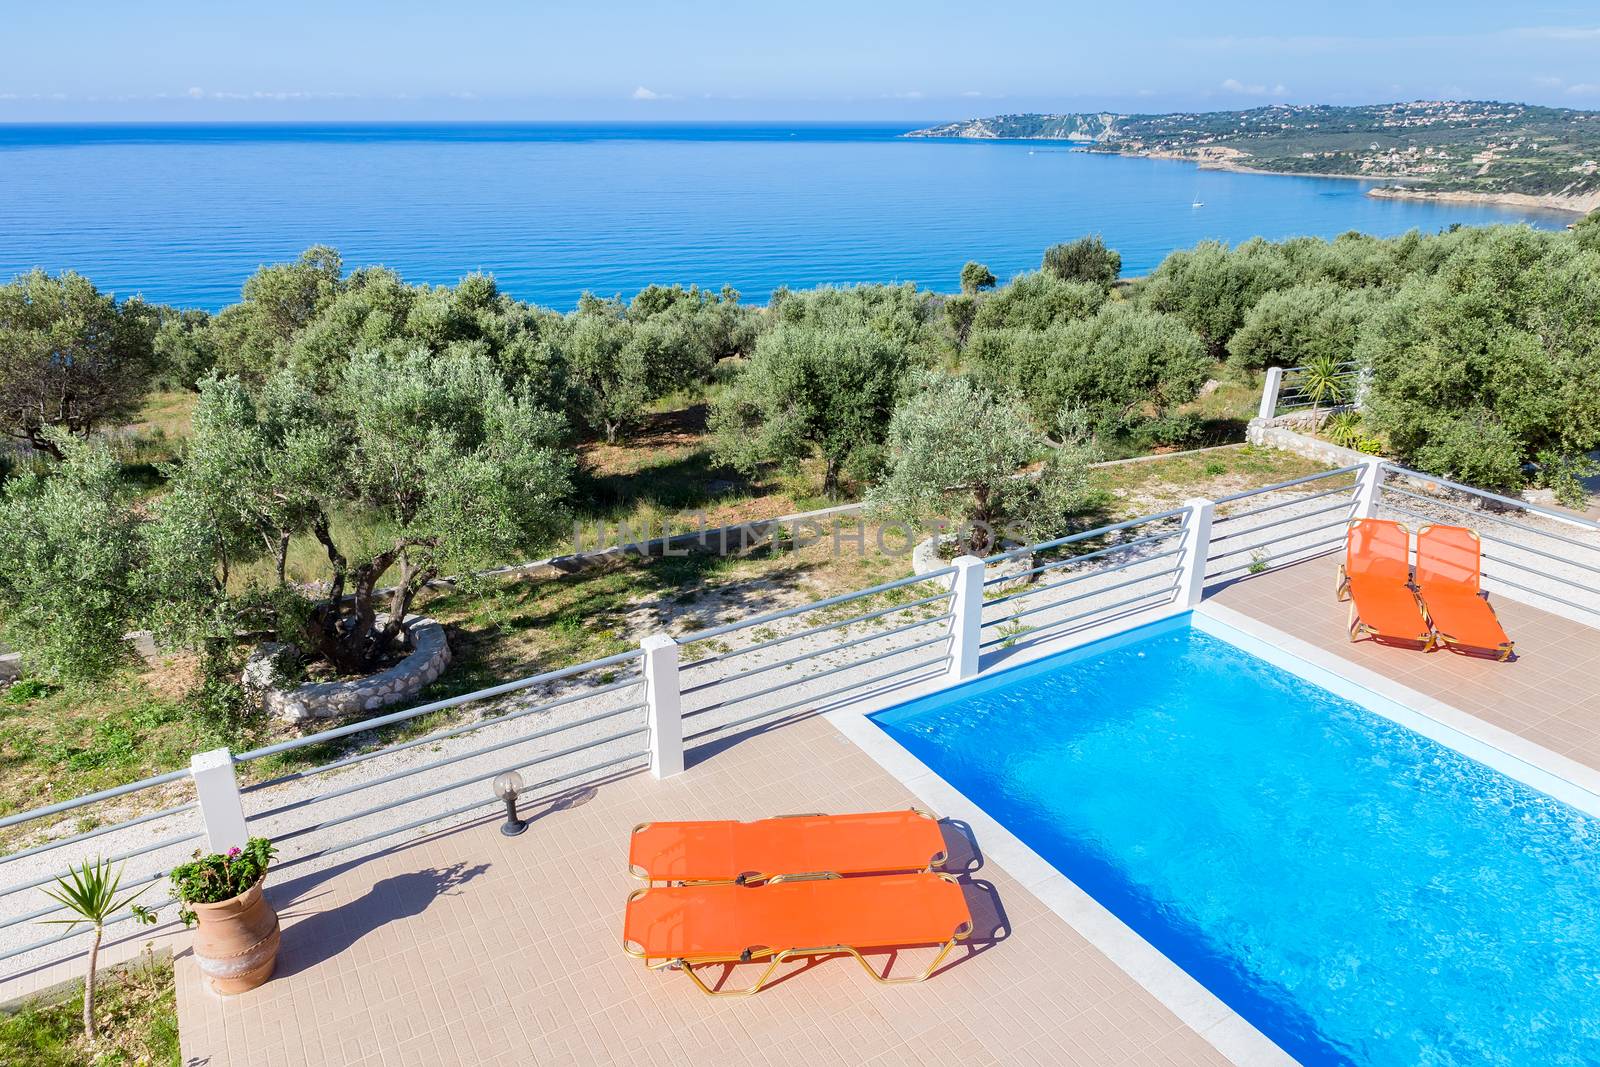 Sunloungers on terrace with blue swimming pool near sea at coast in Greece